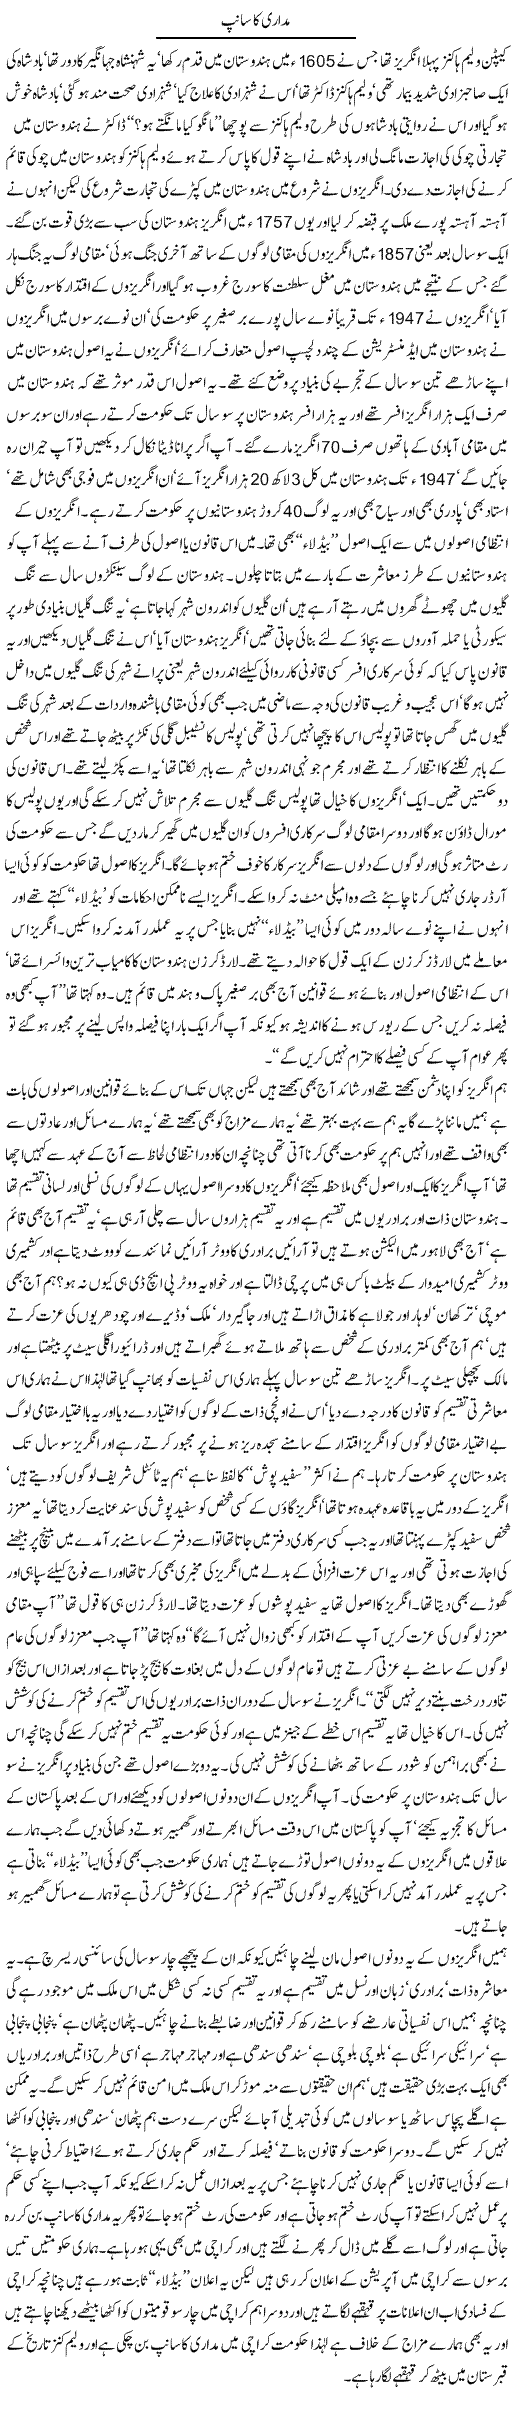 History of India Express Column Javed Chaudhry 4 September 2011